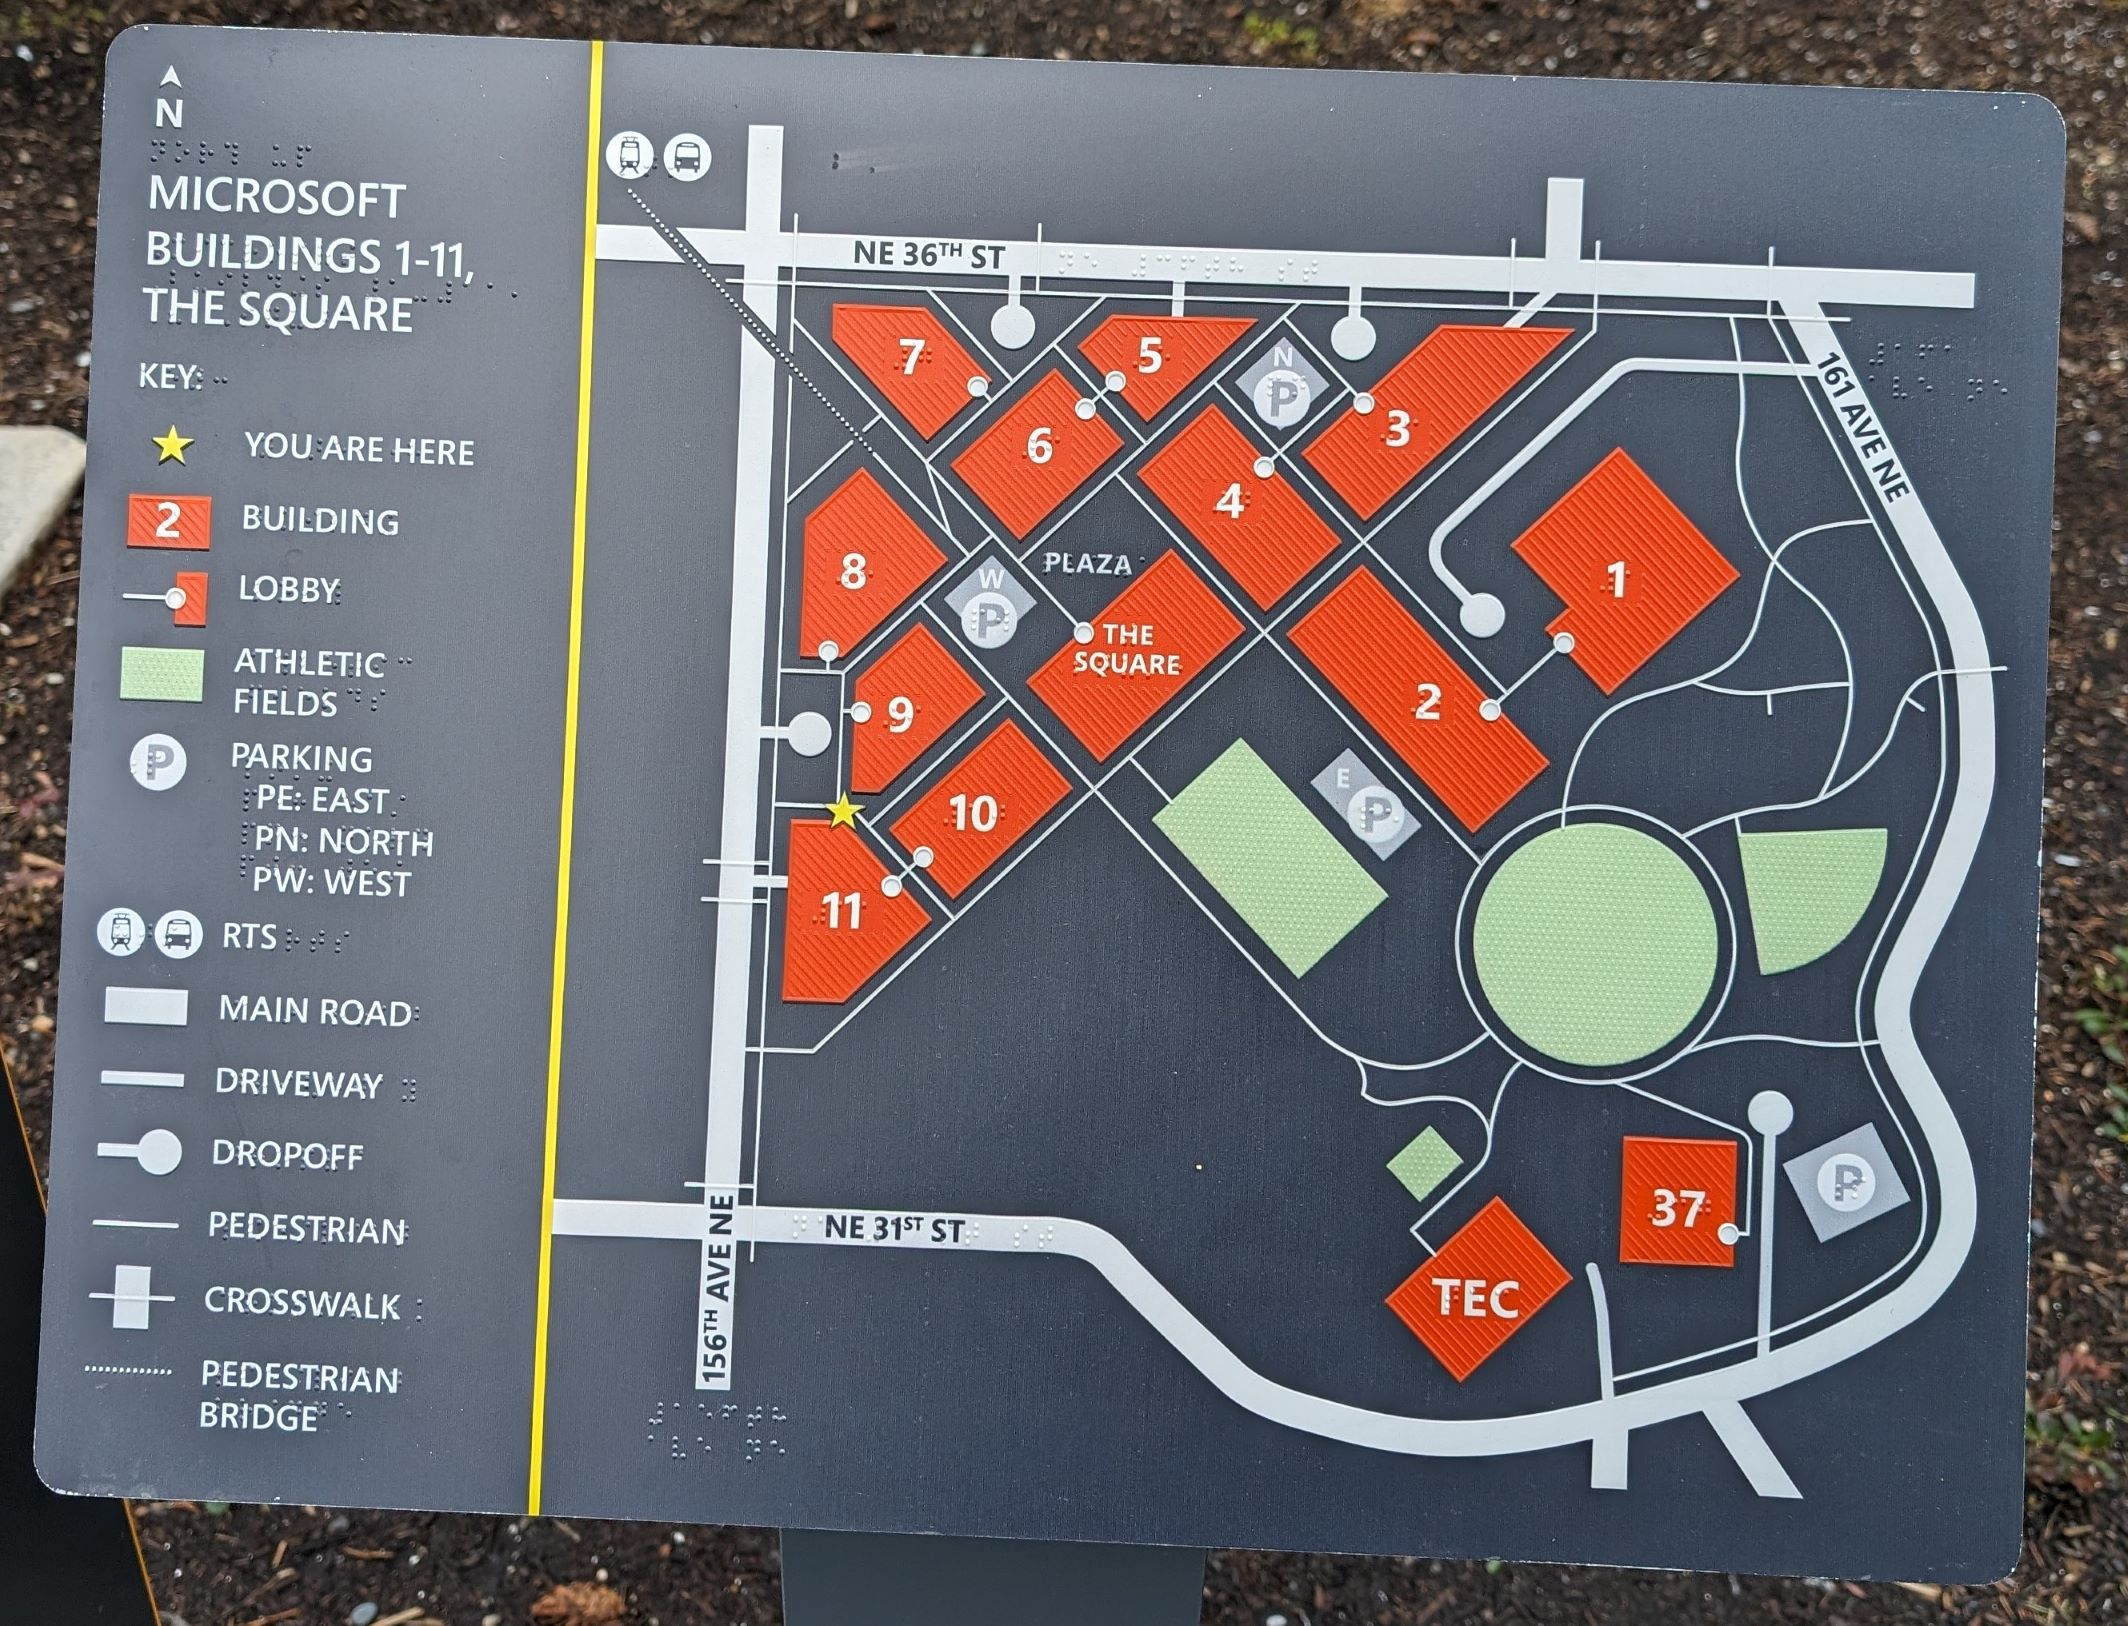 A physical map mounted at the new Microsoft campus.